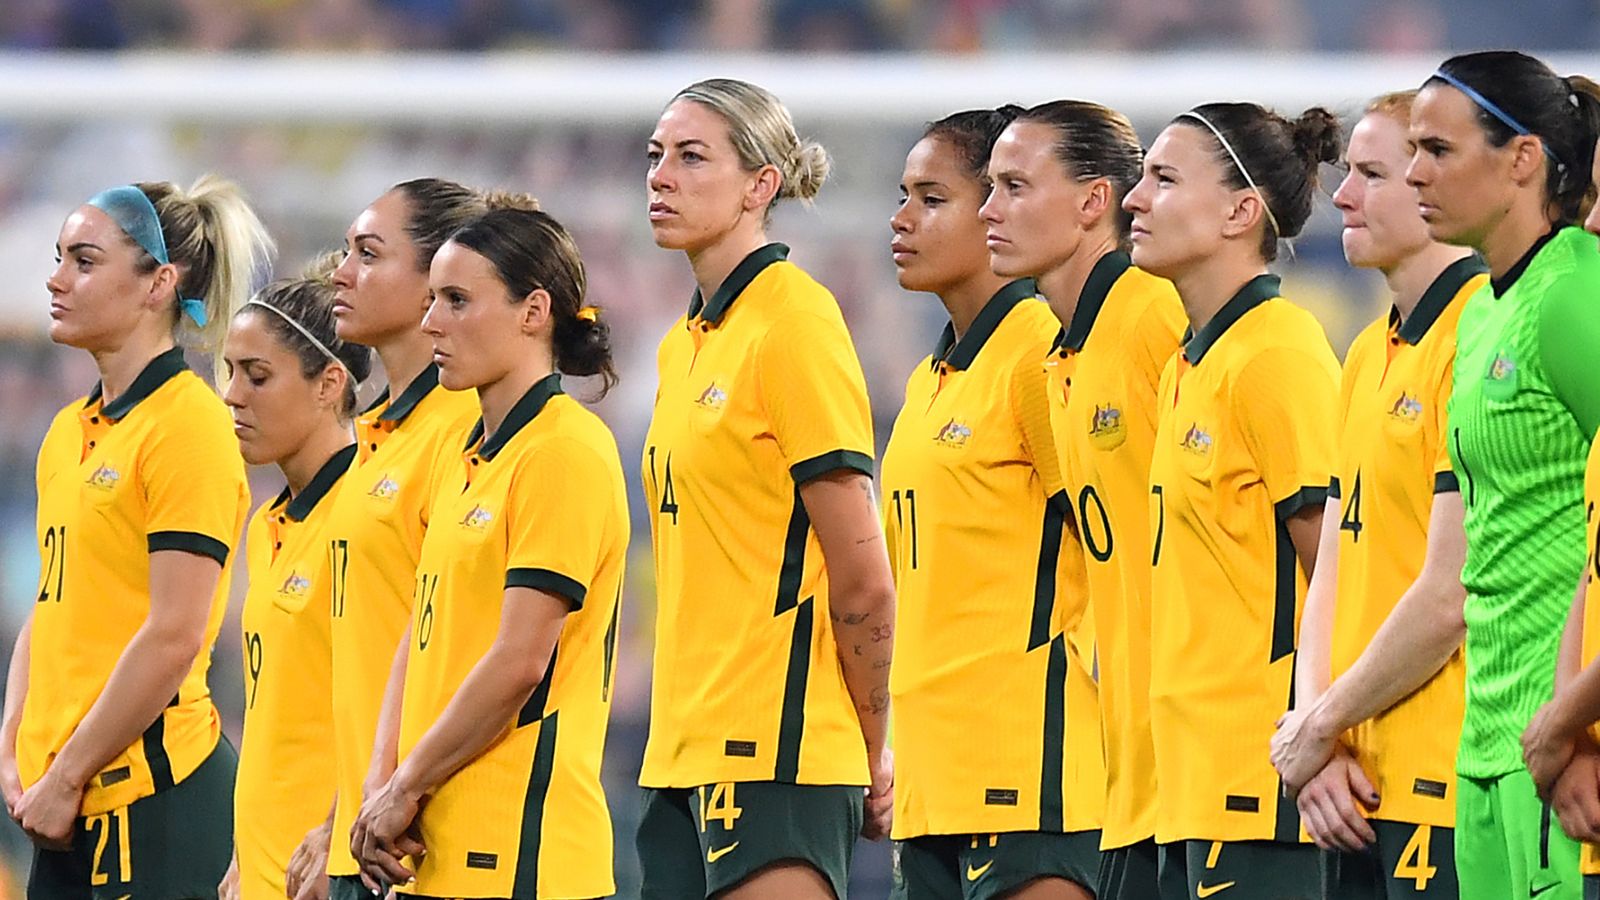 Brazil announces equal pay for men's and women's national players